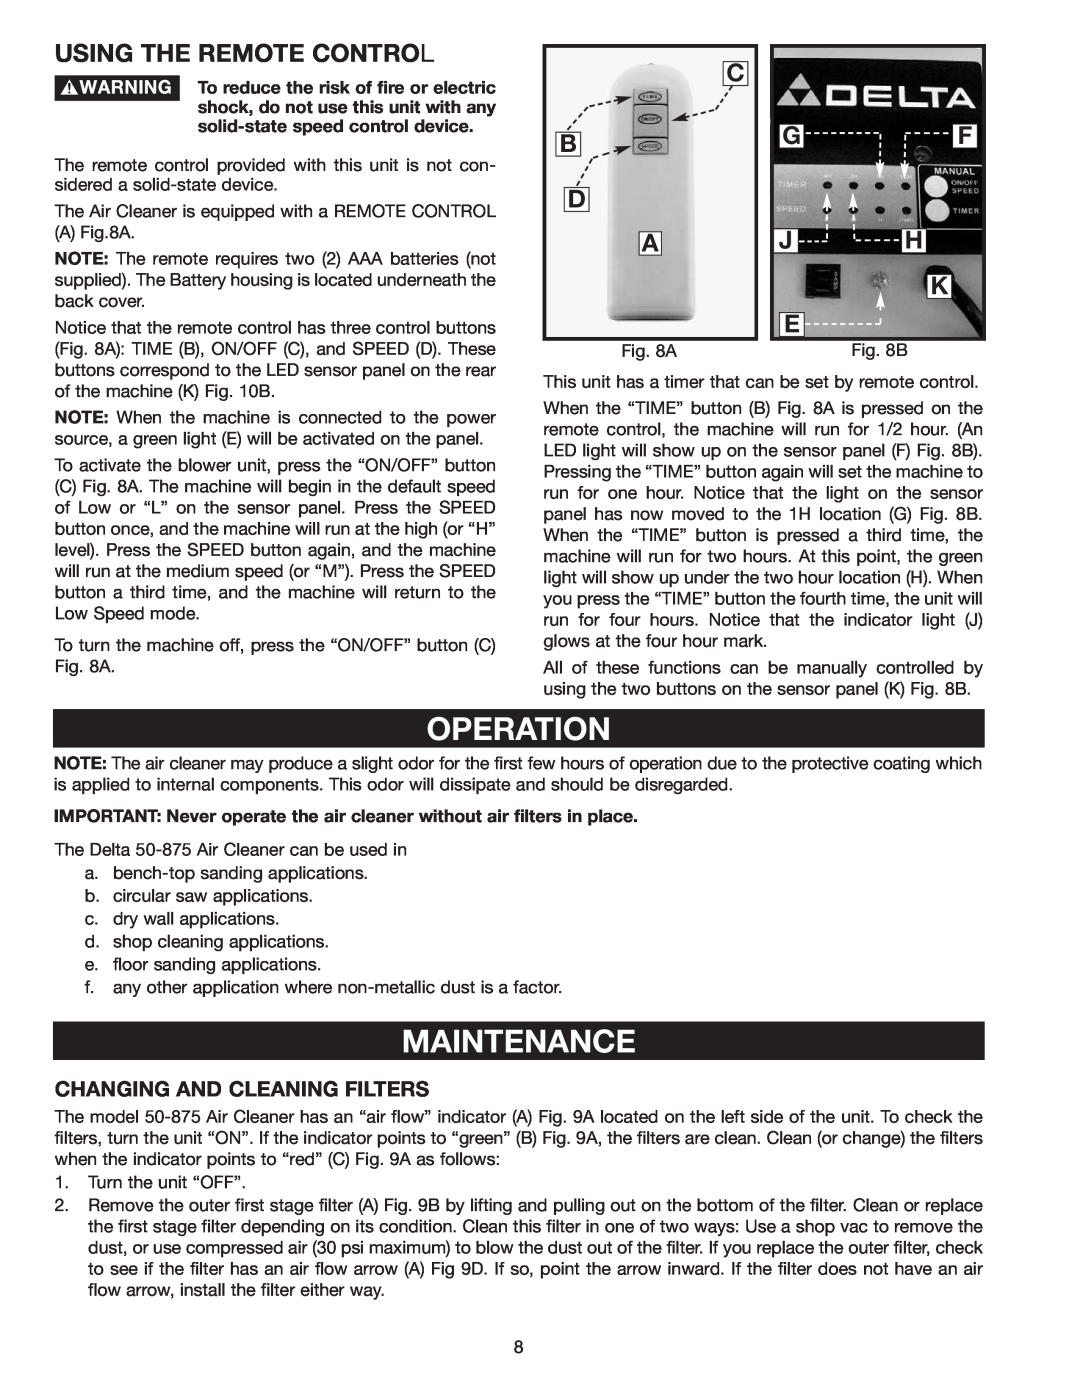 Delta 50-875 instruction manual Operation, Maintenance, Using The Remote Control 